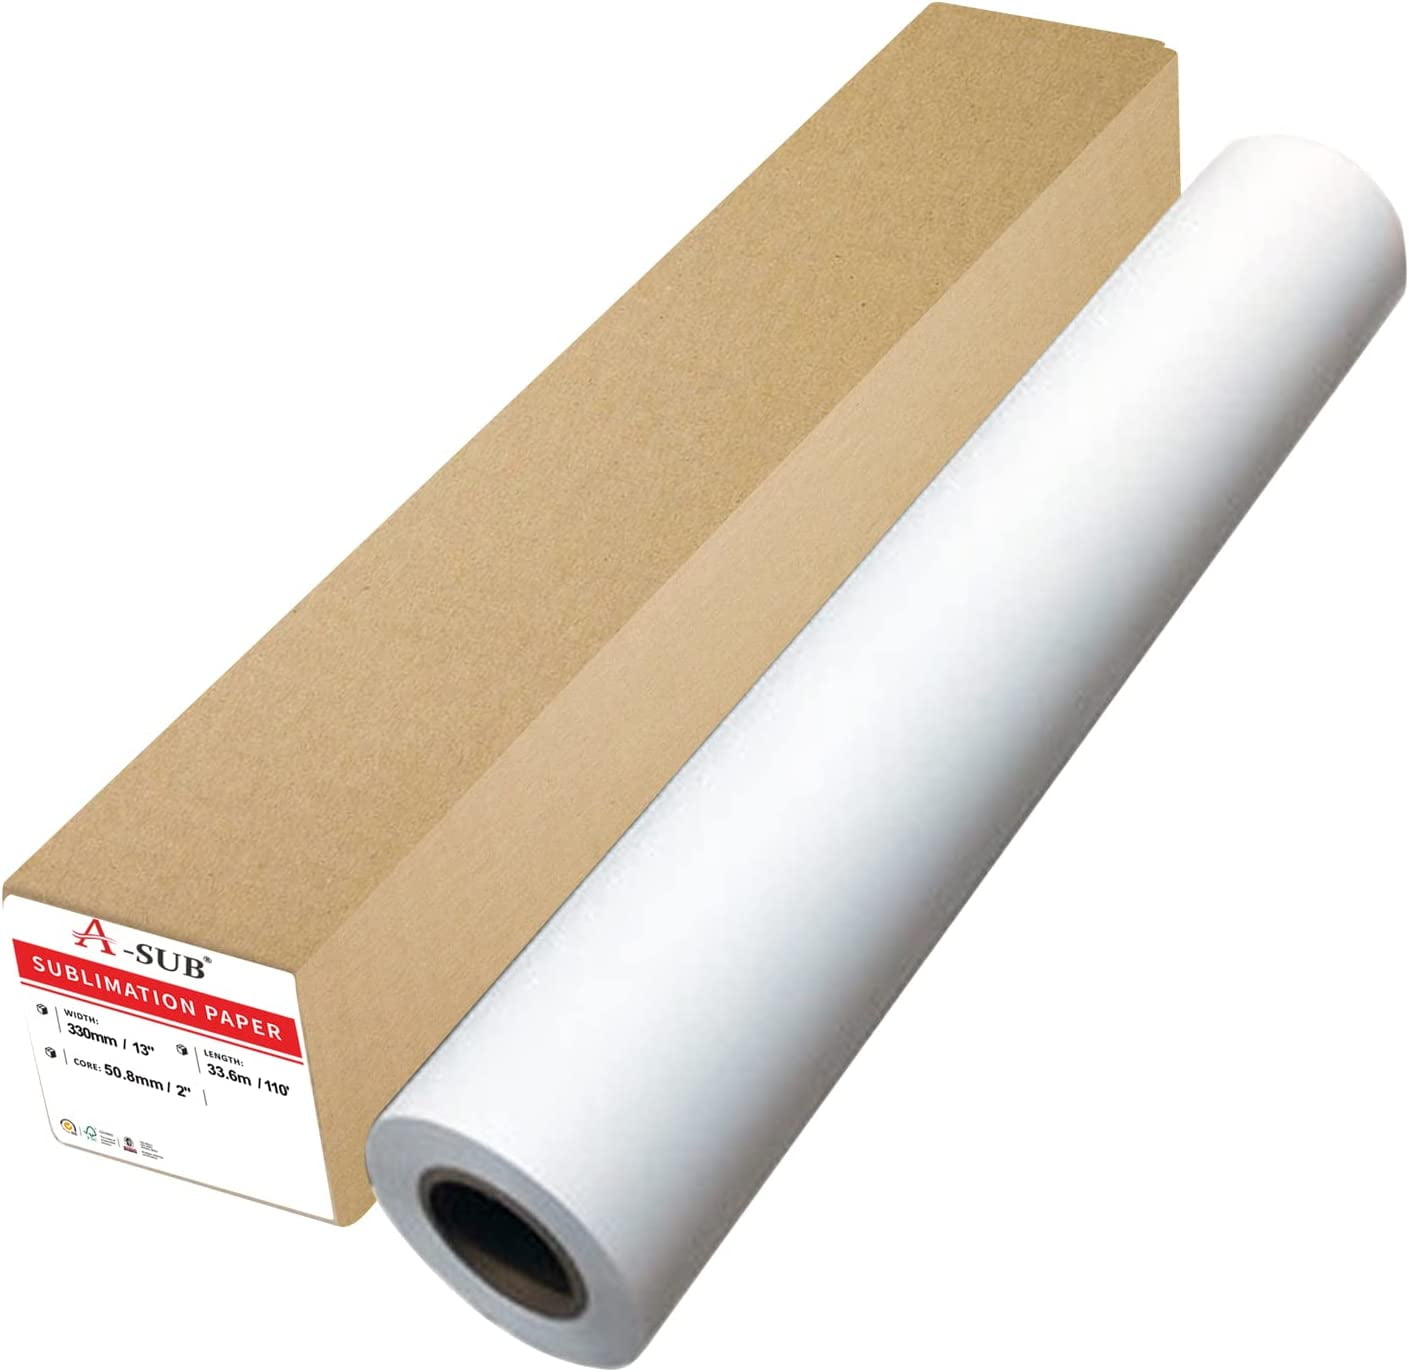 10pcs Heat Transfer Printing Paper A4 Sublimation Transfer Paper (White)